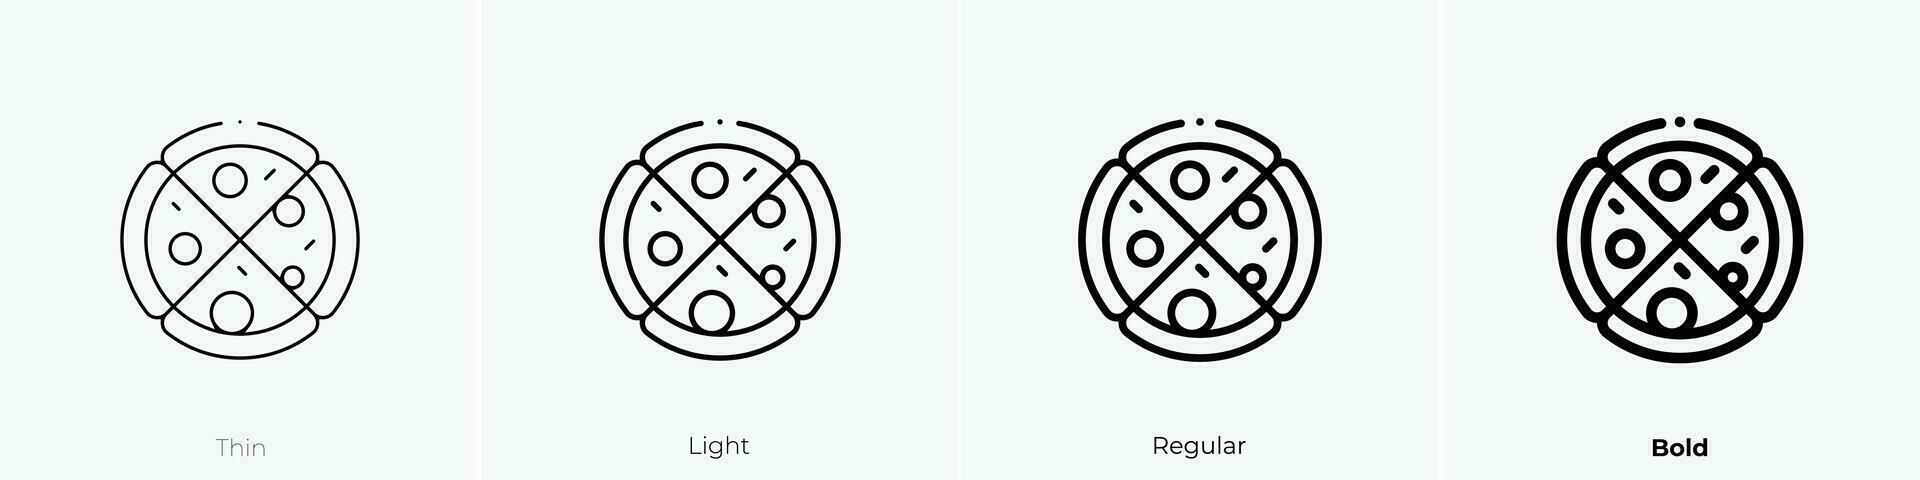 pizza icon. Thin, Light, Regular And Bold style design isolated on white background vector